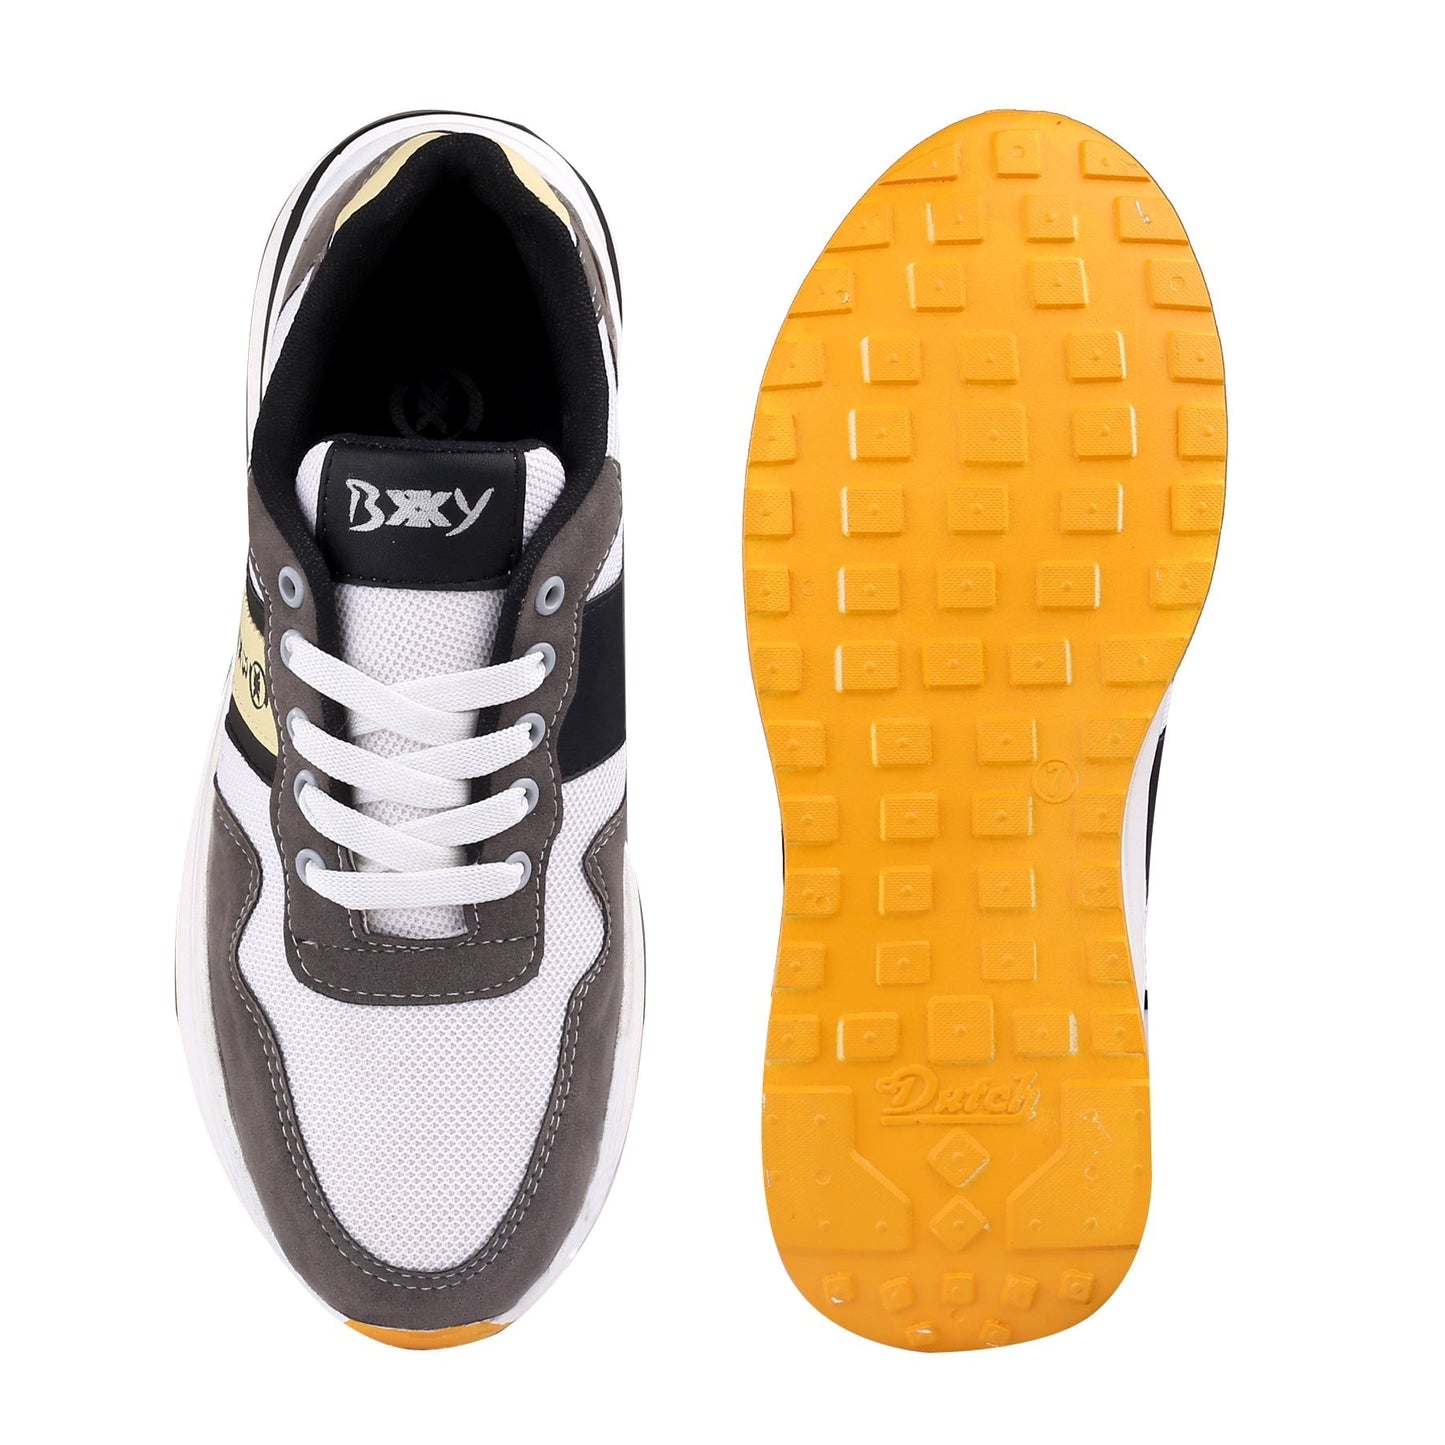 Bxxy's Casual Lace-up Shoes for all Seasons